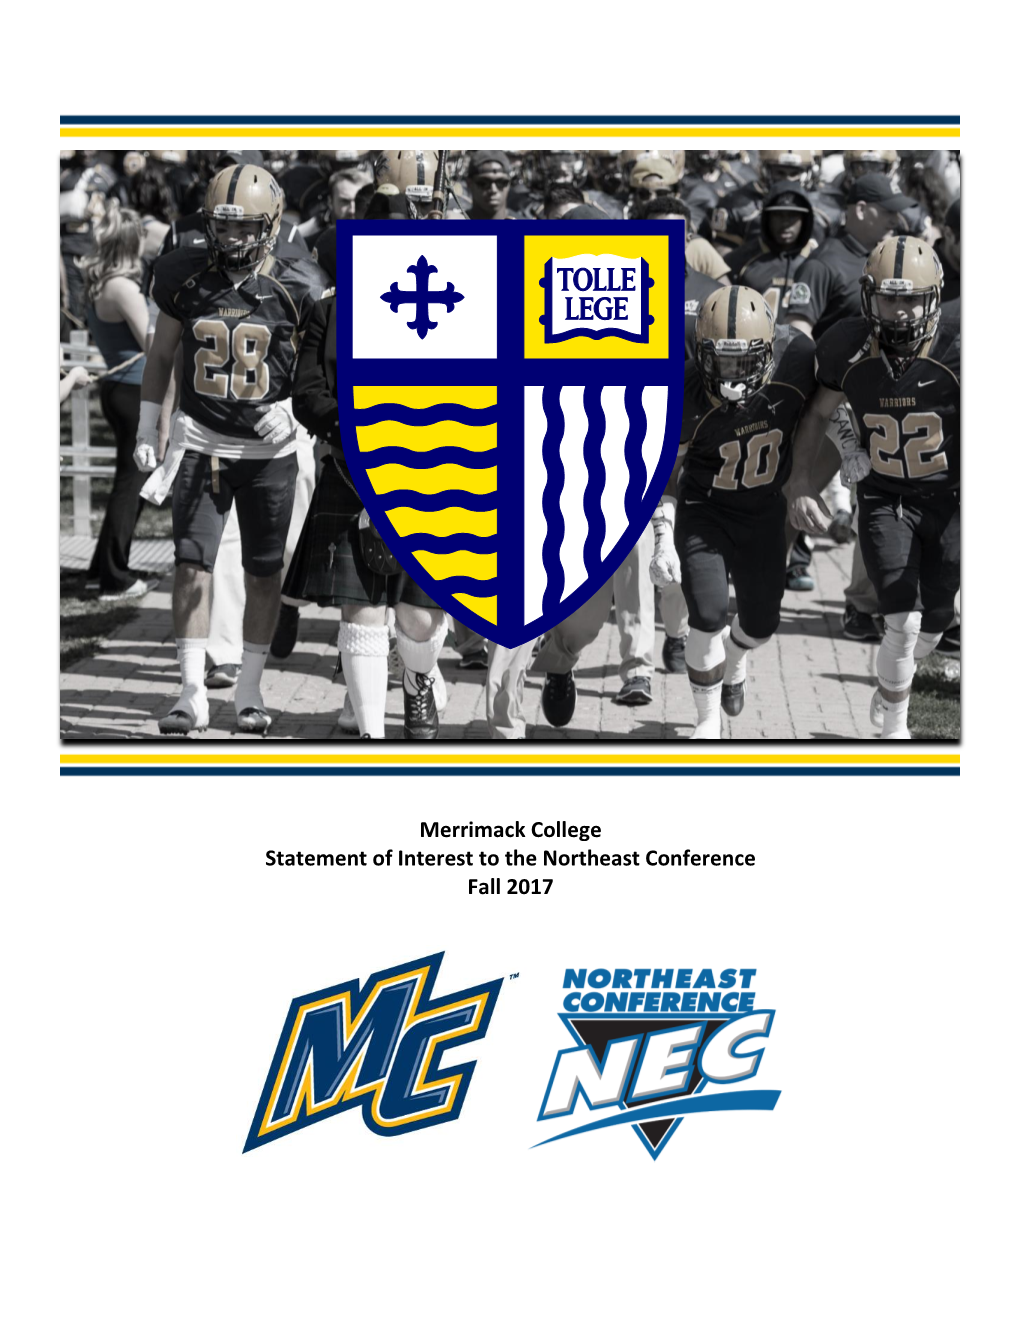 Merrimack College Statement of Interest to the Northeast Conference Fall 2017